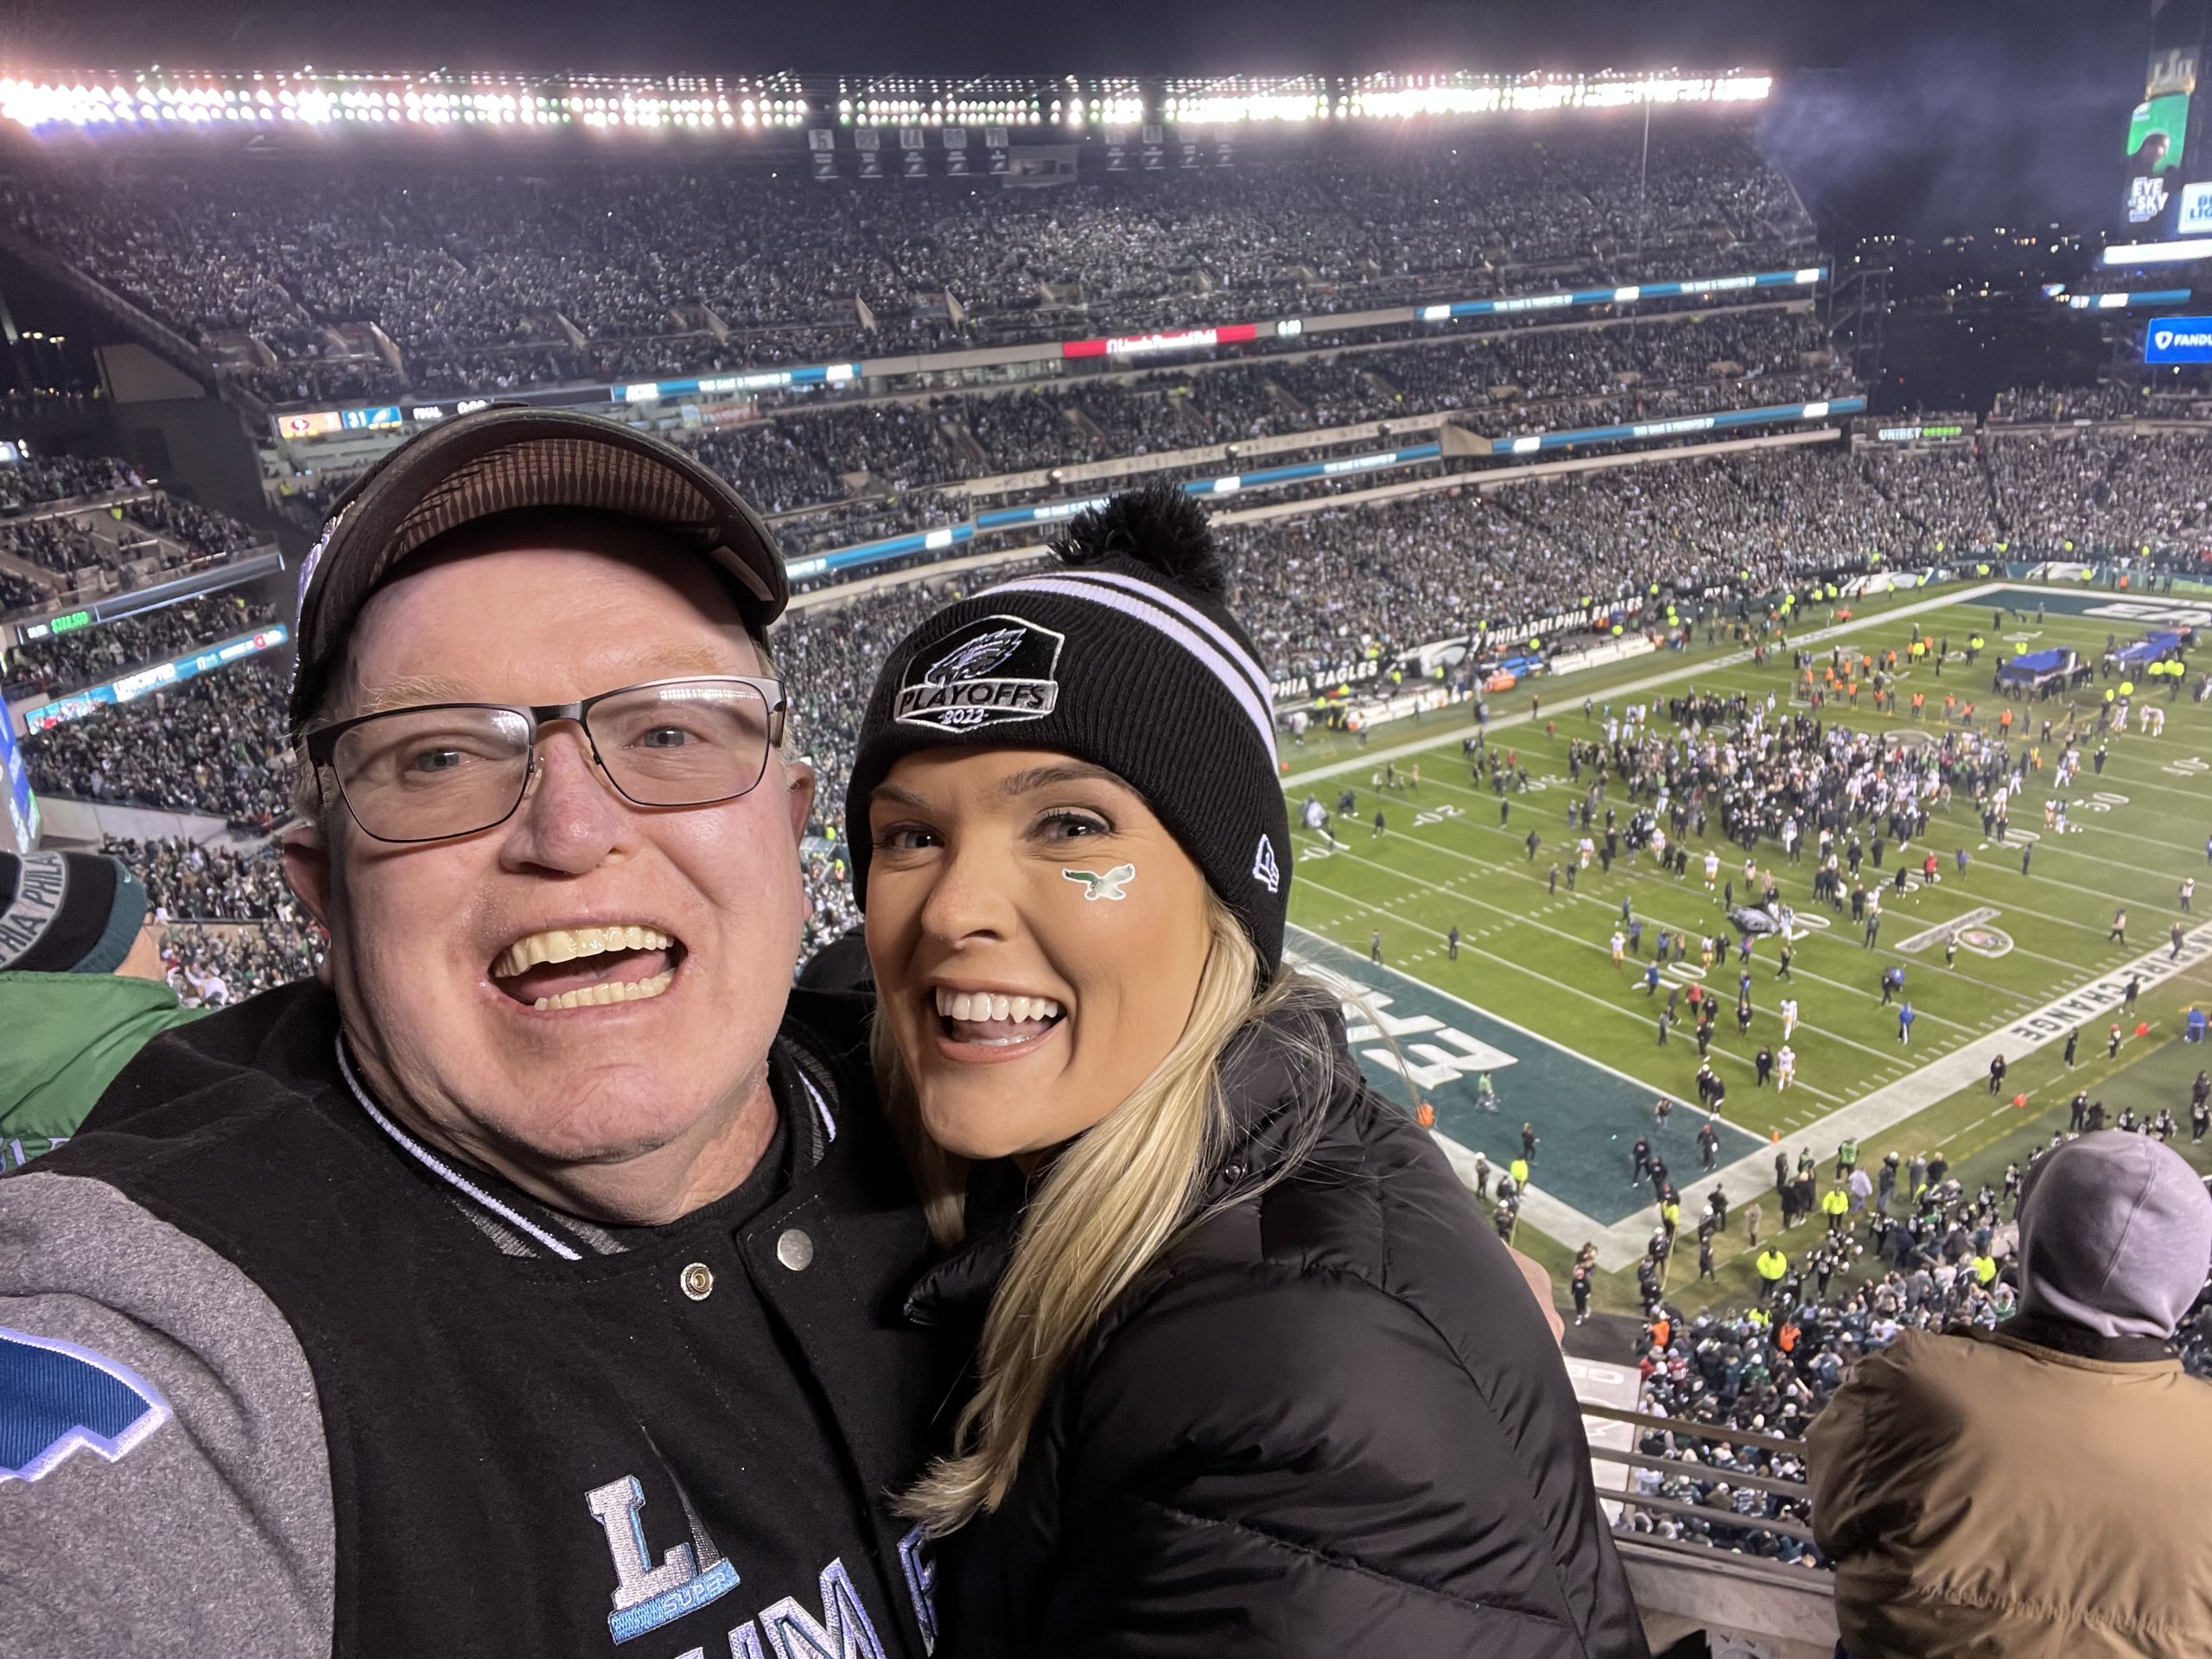 Brigid and Terry at the NFC Championship. Photo by Brigid Dillon.